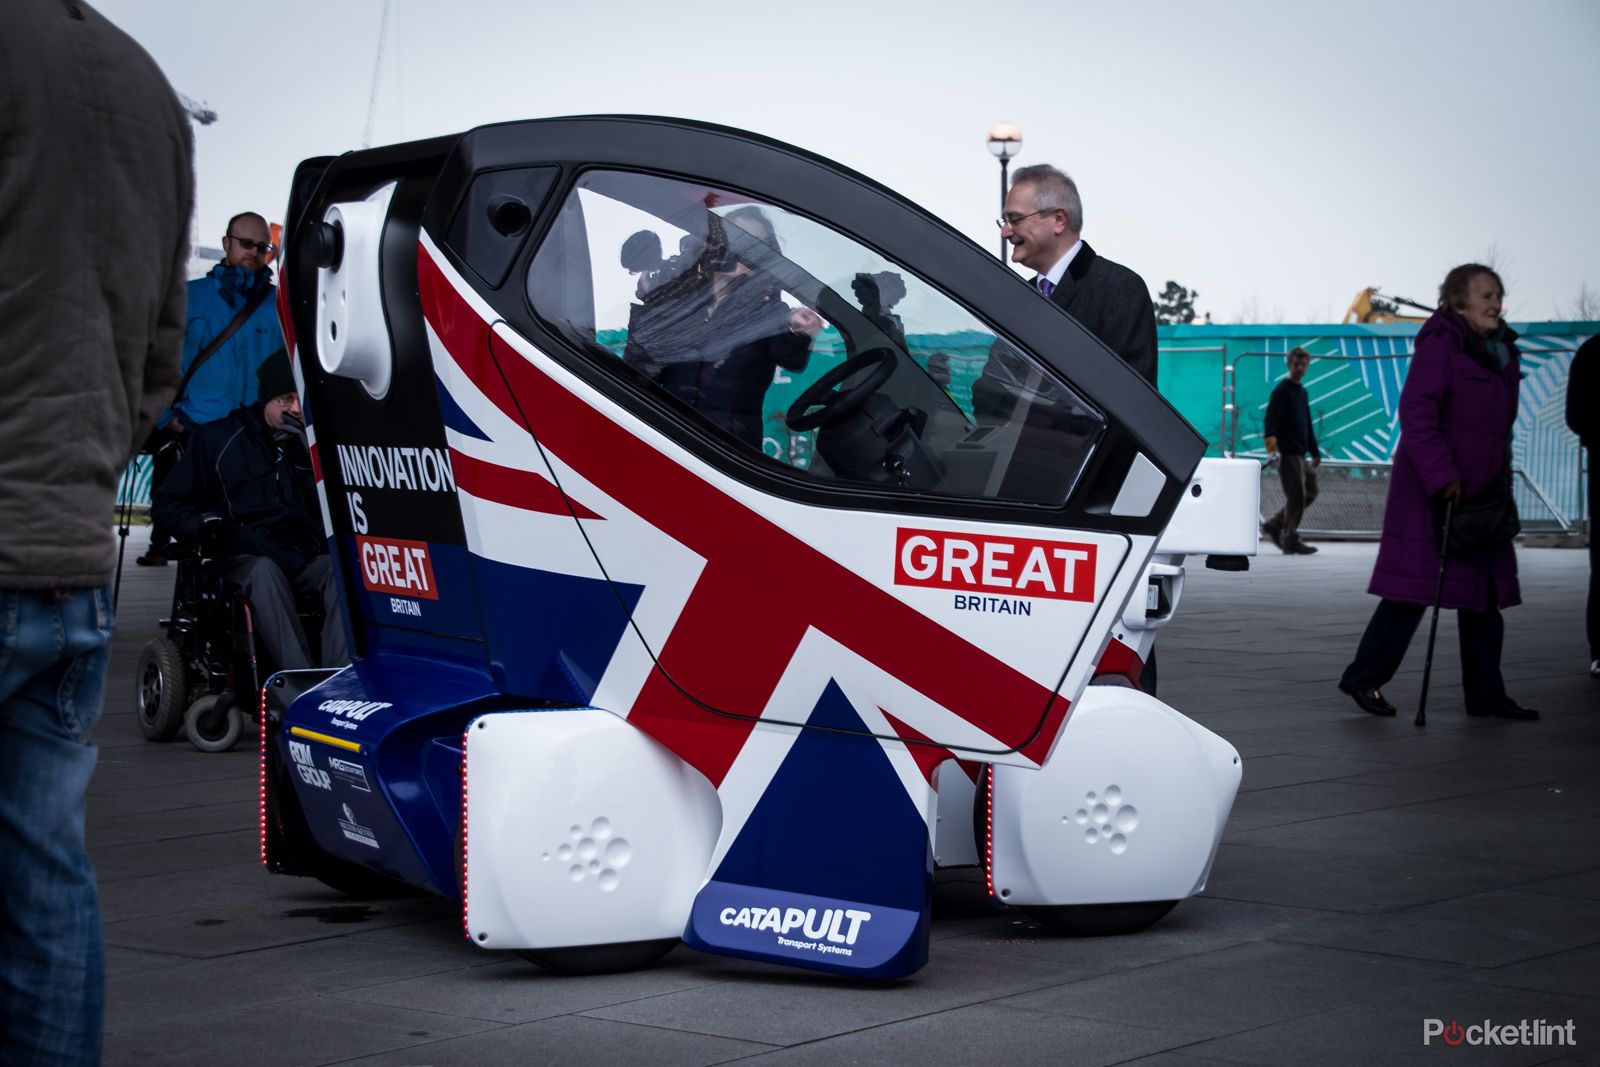 are driverless pod cars really the future the uk government seems to think so image 1